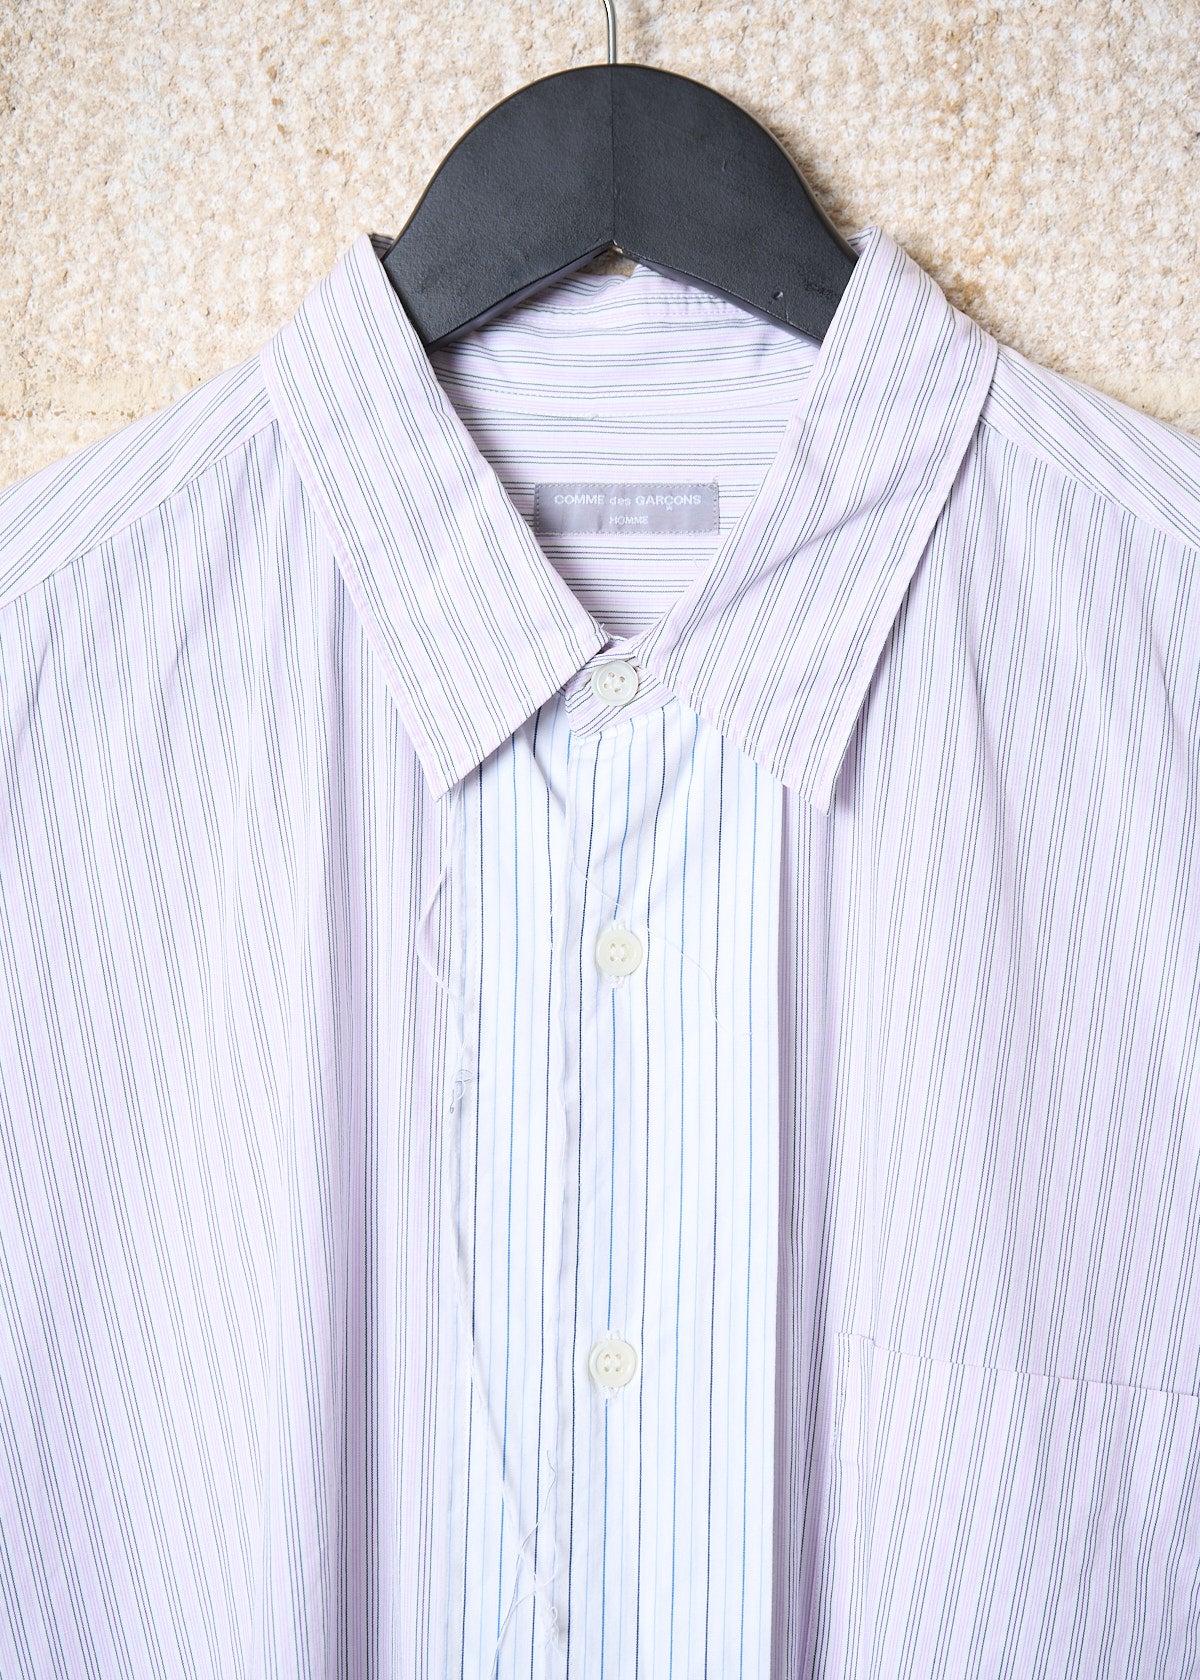 CDG Homme Distressed Striped Cotton Shirt 2000 - Large